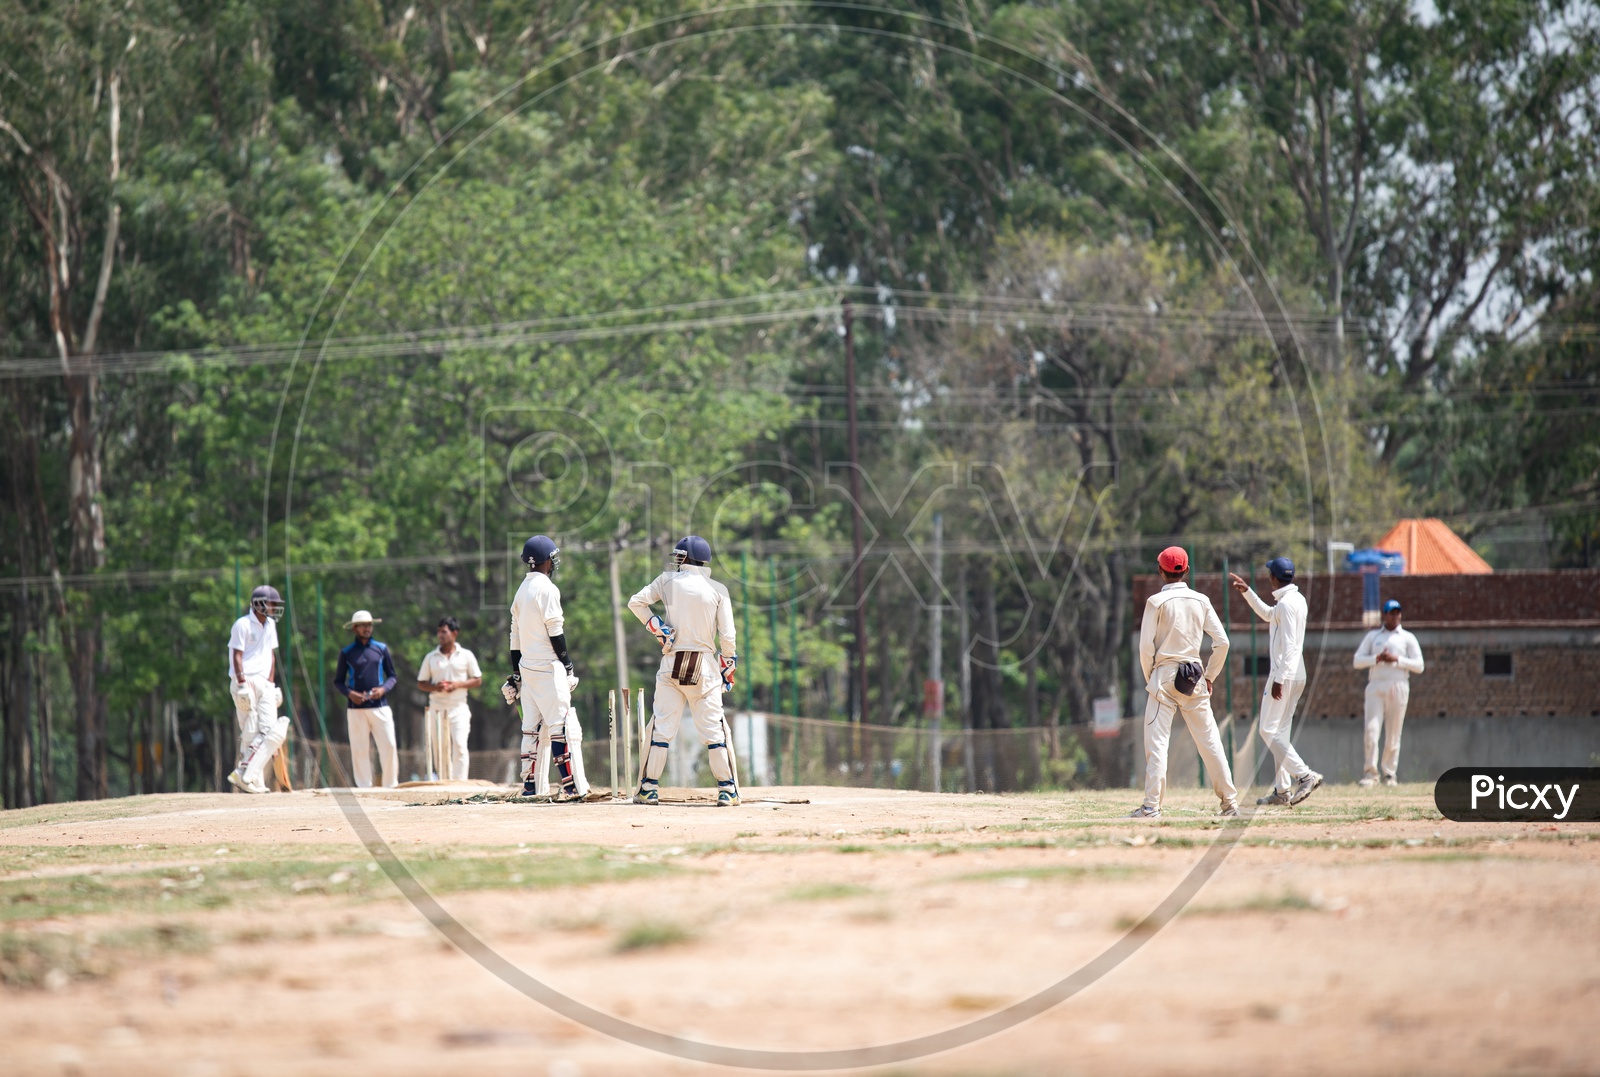 Cricket Players Playing Cricket Match In a Stadium